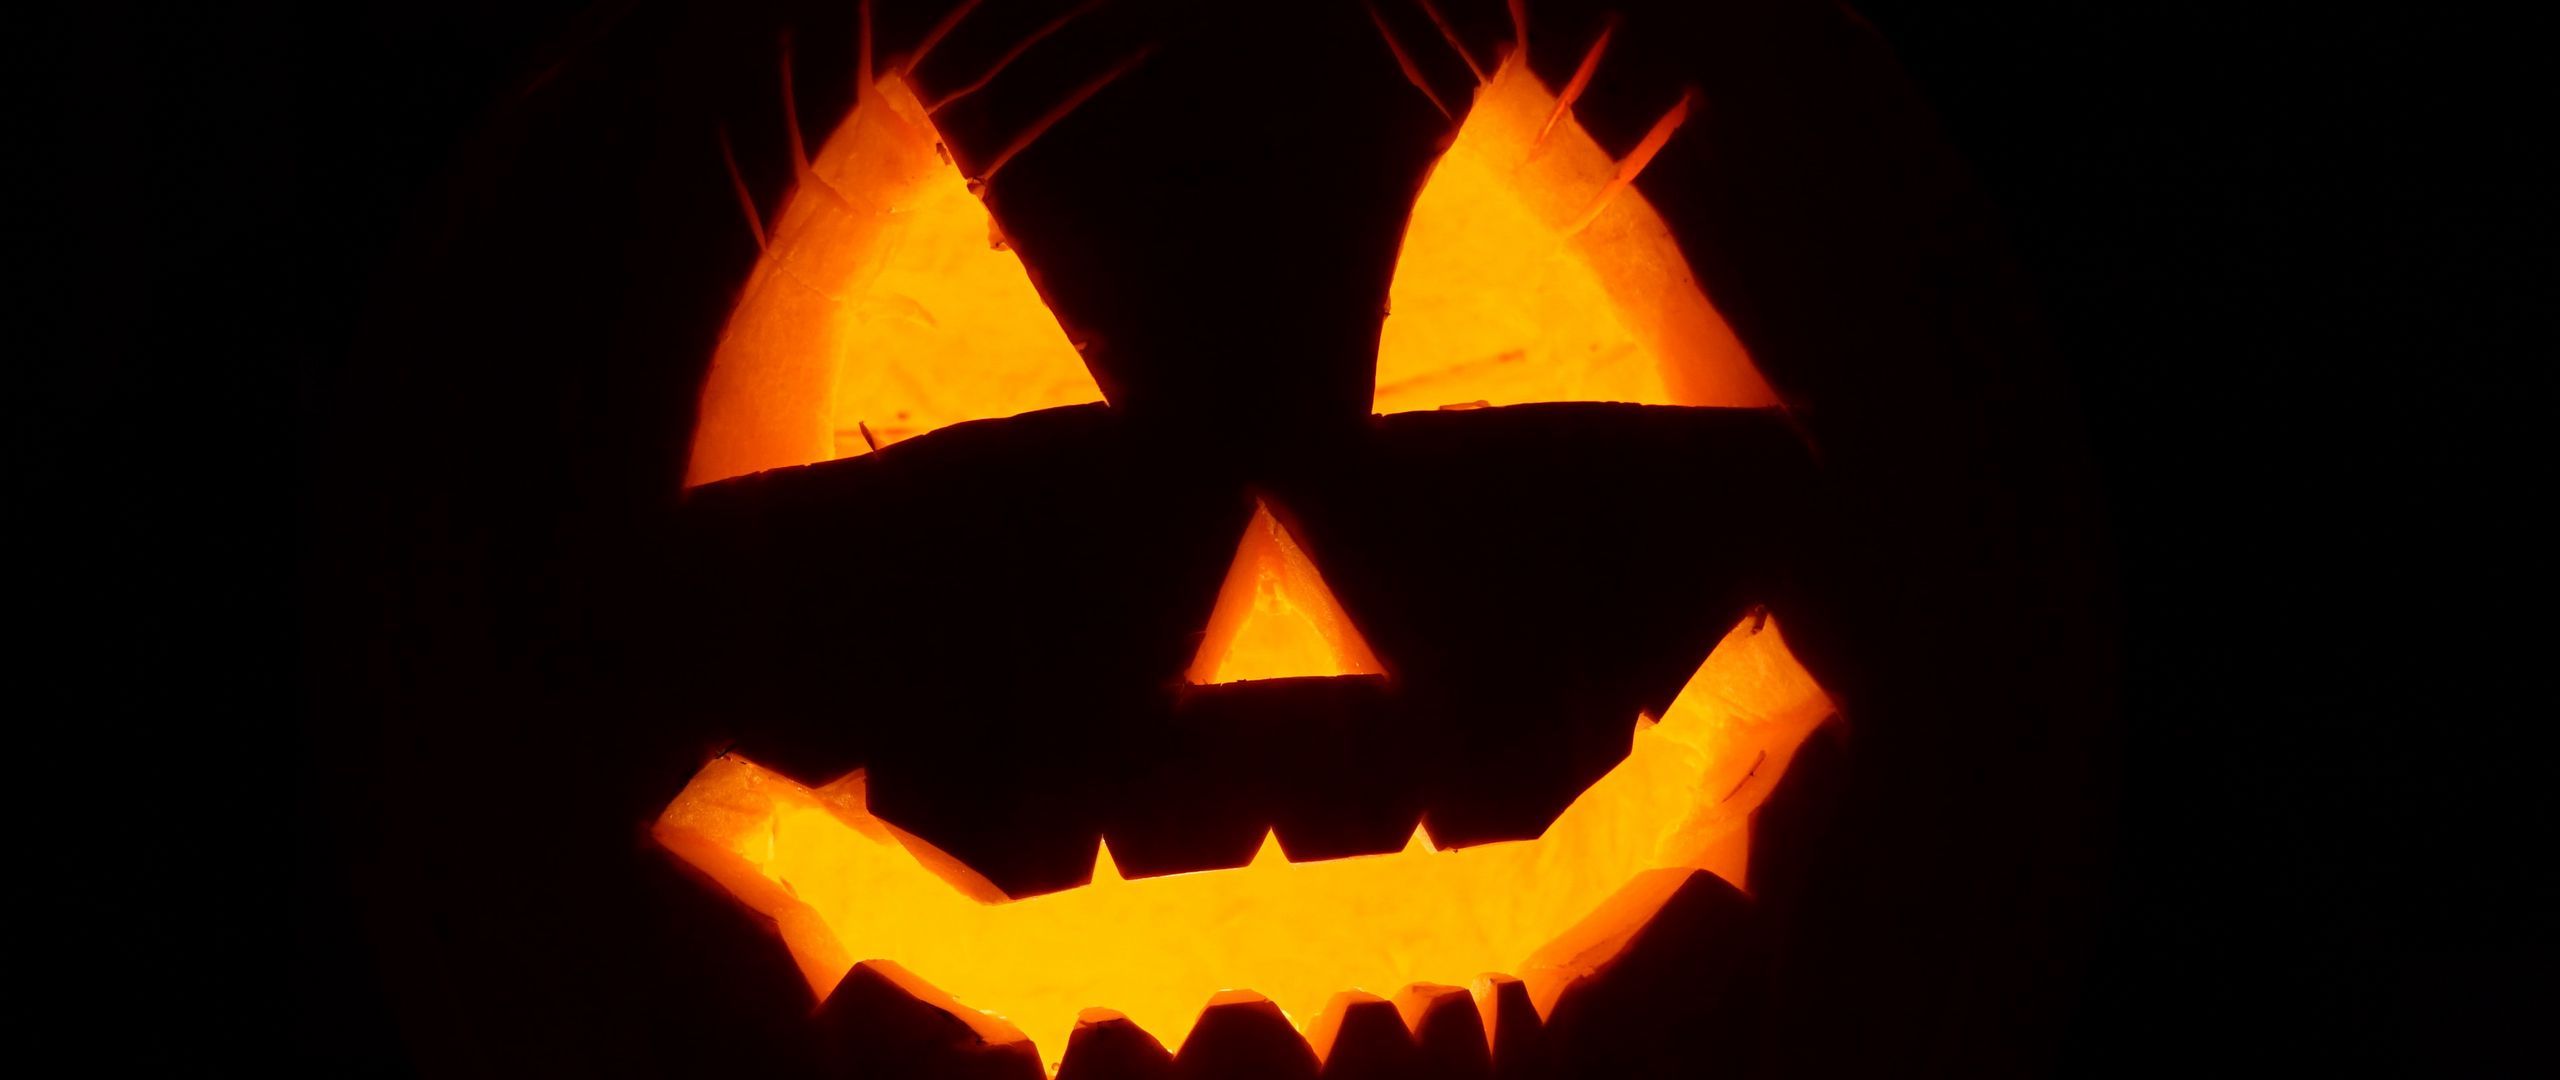 Download wallpaper 2560x1080 halloween, face, black background dual wide 1080p HD background